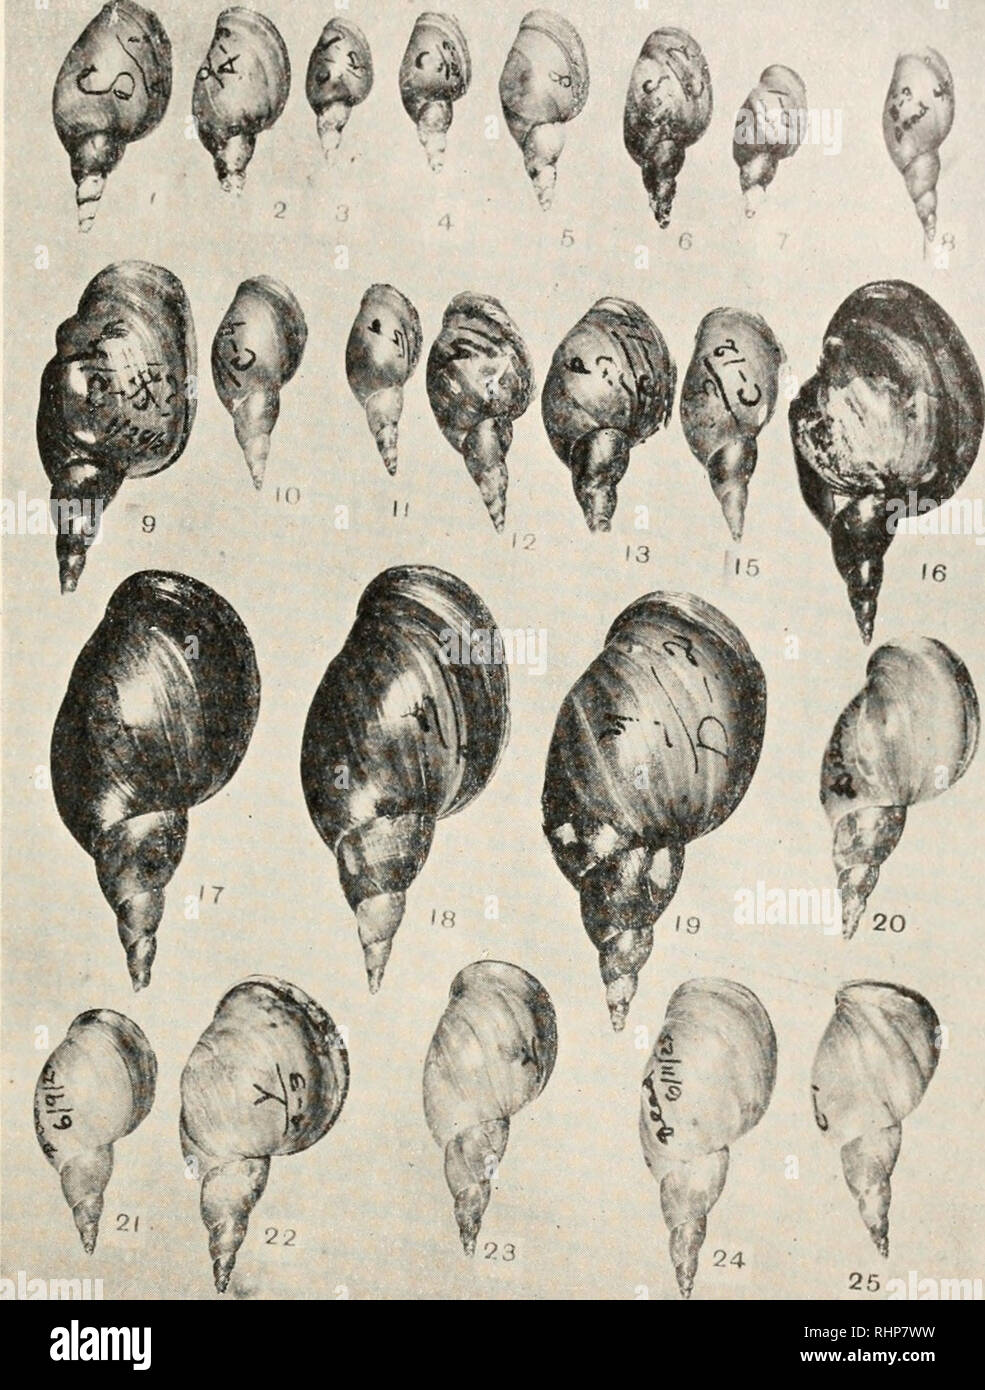 . The Biological bulletin. Biology; Zoology; Biology; Marine Biology. GROWTH OF A POND SNAIL. 59. FIG. 9 shows the effect of favorable (Nos. 17-19) and unfavorable culture media on growth; food and other factors being equal. (X i.) Nos. 1-7, distilled water and leaf lettuce (see Figs. 5, 6, L, E); ages at death were as follows; No. i, 231 days; 2, 235; 3, 199; 4, 175; 5, 168; 6, 269; 7, 196. Nos. i and 2 are from group B, Fig. 5; Nos. 3 and 4, H, Fig. 5; 5 and 6, L, Figs. 5 and 6; 7, AT Fig. 5 or E, Fig. 6. No. 8 (Fig. 7, B), tap water and iceberg lettuce, age 74 days. Nos. 9-16, foul media (F Stock Photo